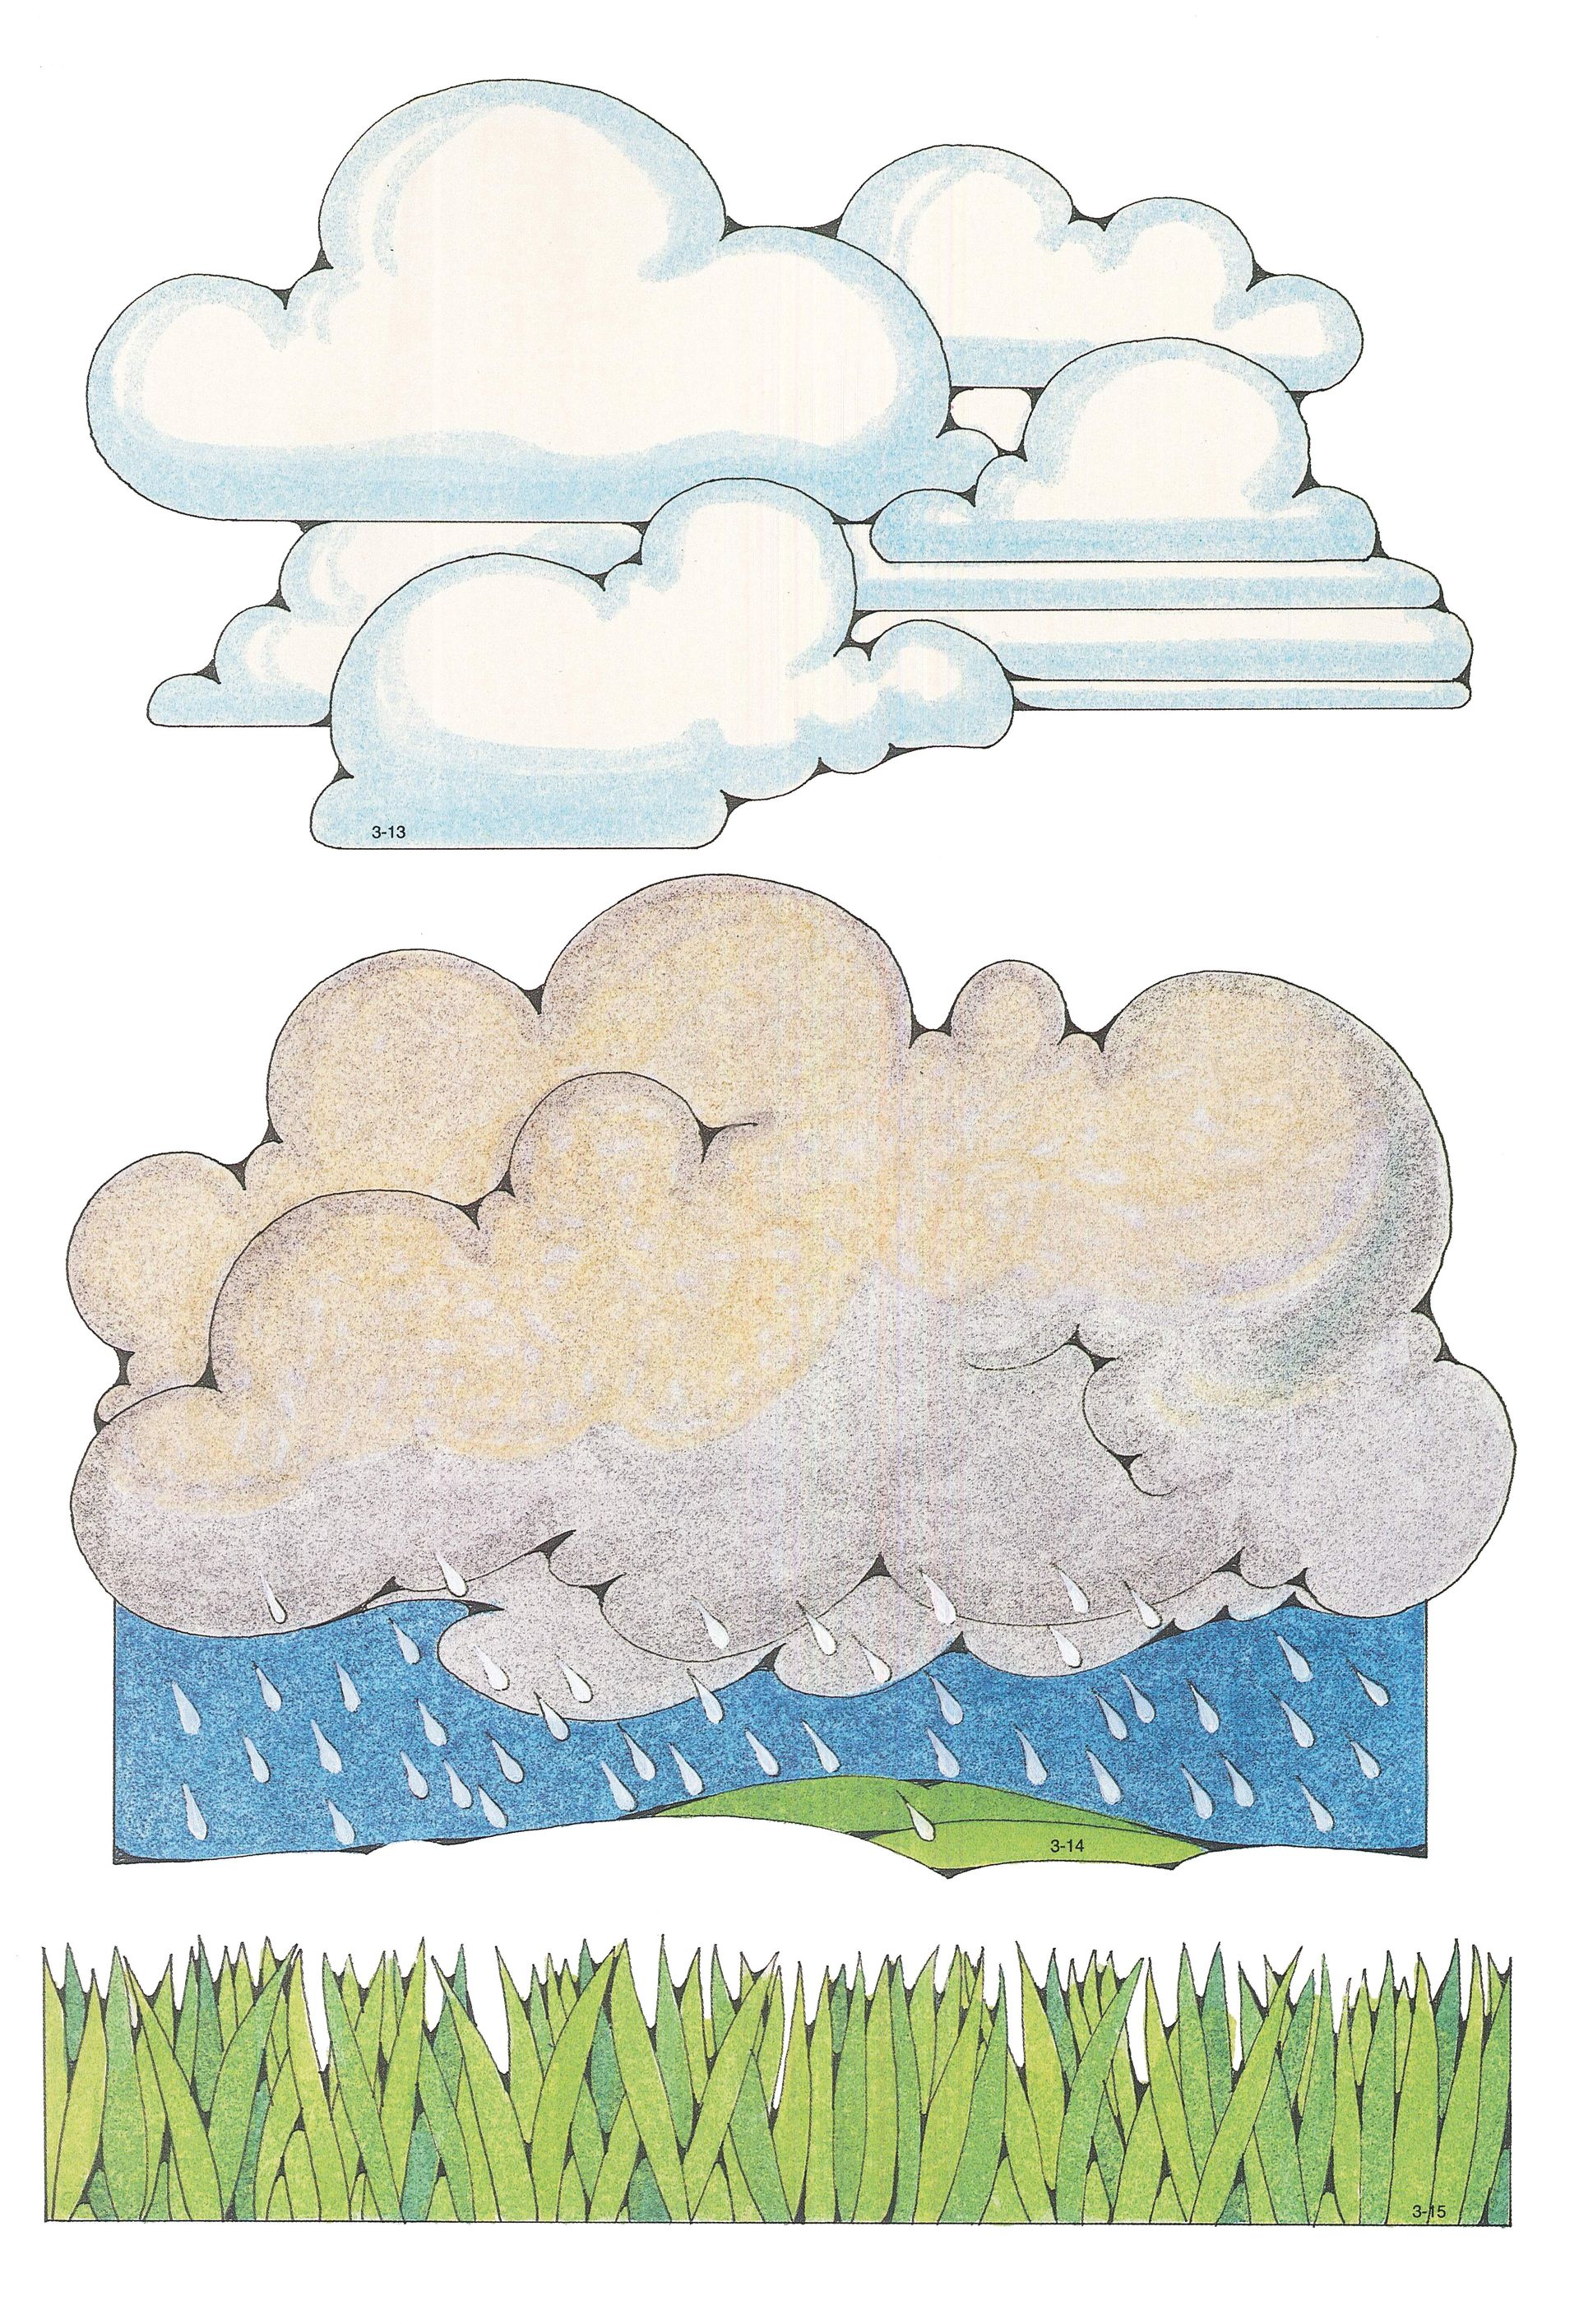 Primary Visual Aids: Cutouts 3-13, White Clouds; 3-14, Rain Falling from Dark Clouds; 3-15, Grass.